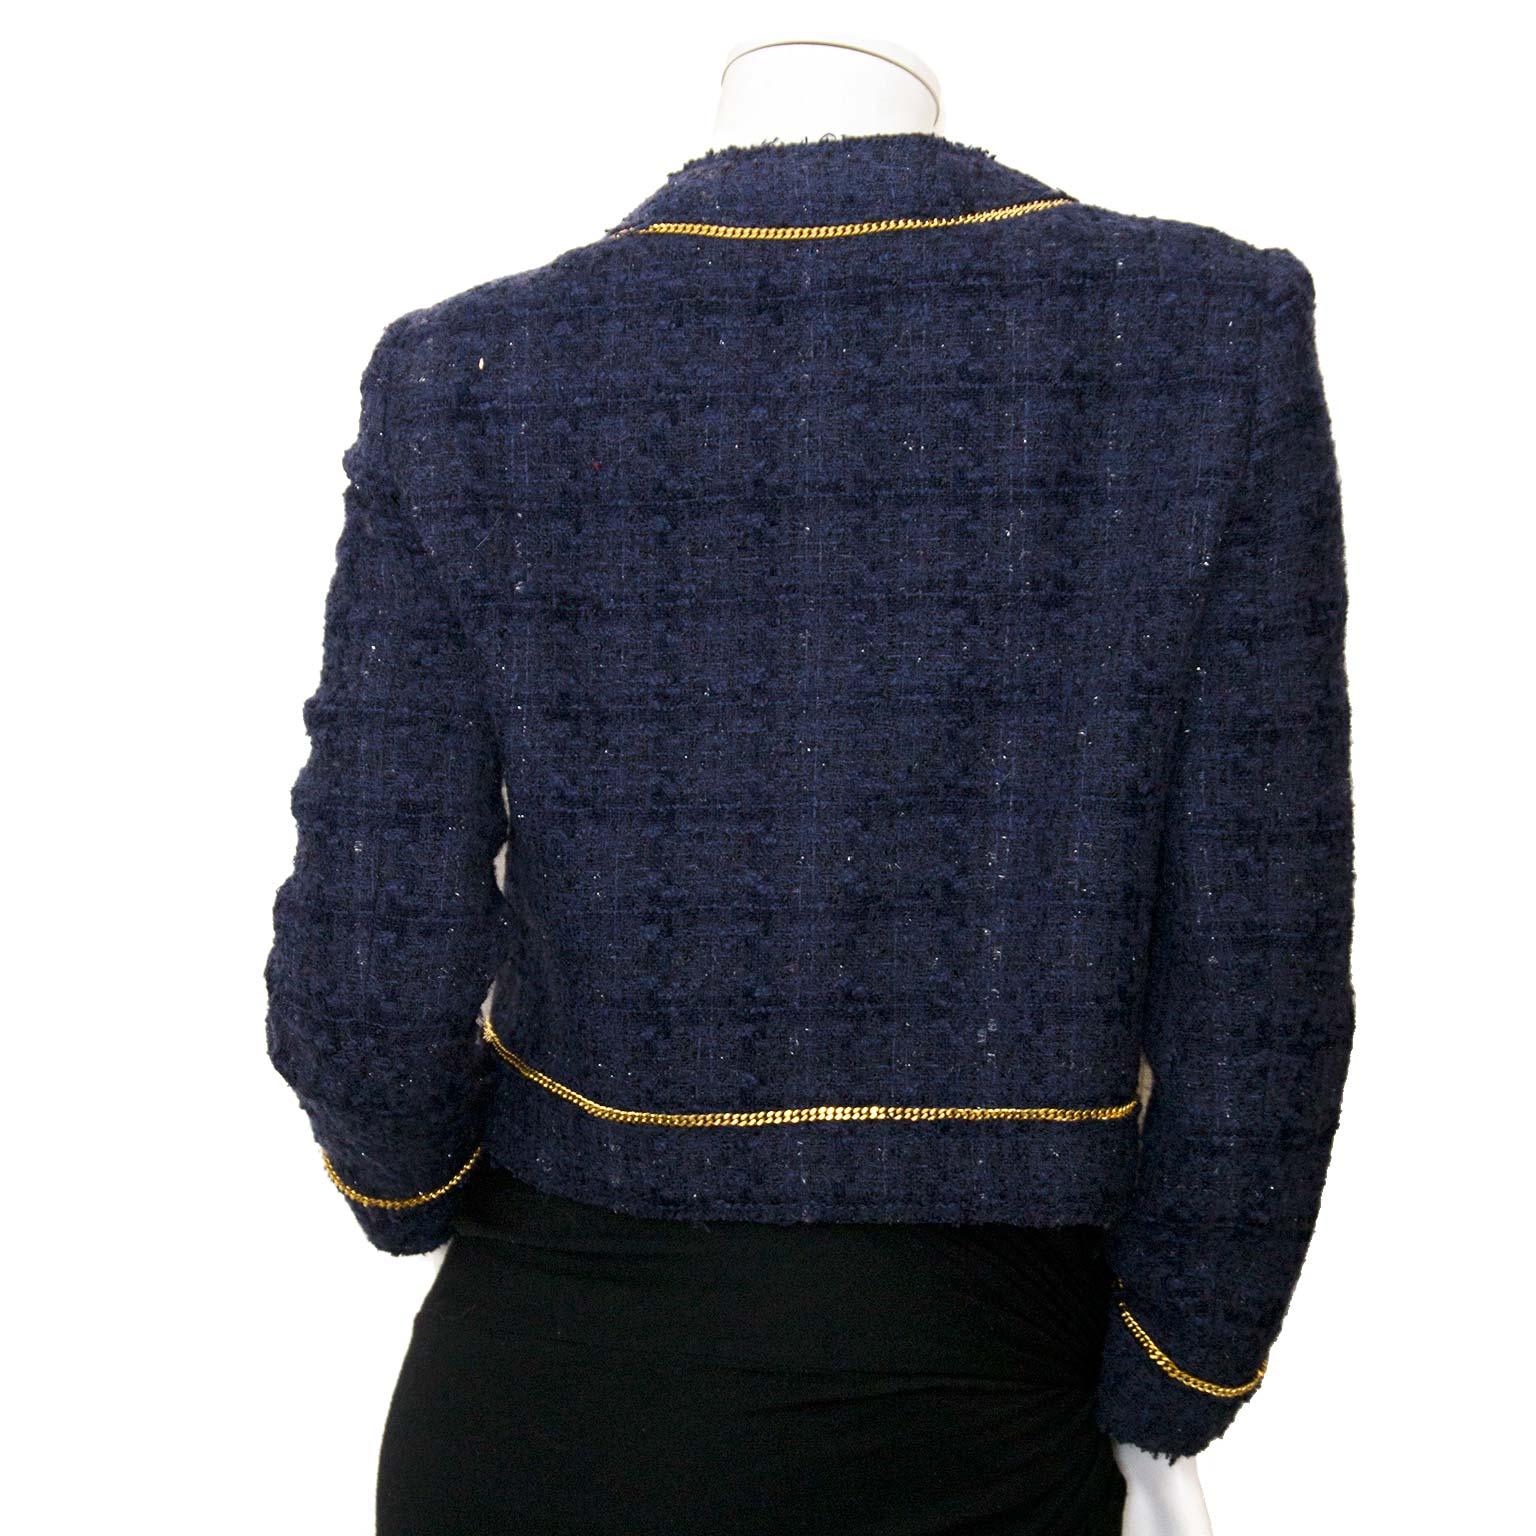 Excellent condition 
This stunning dark blue jacket by Moshino gives an elegent look to your everyday style. The tweed jacket features a gold-toned chain around the sleeves and trim and two pockets in the form of a little pouch. 